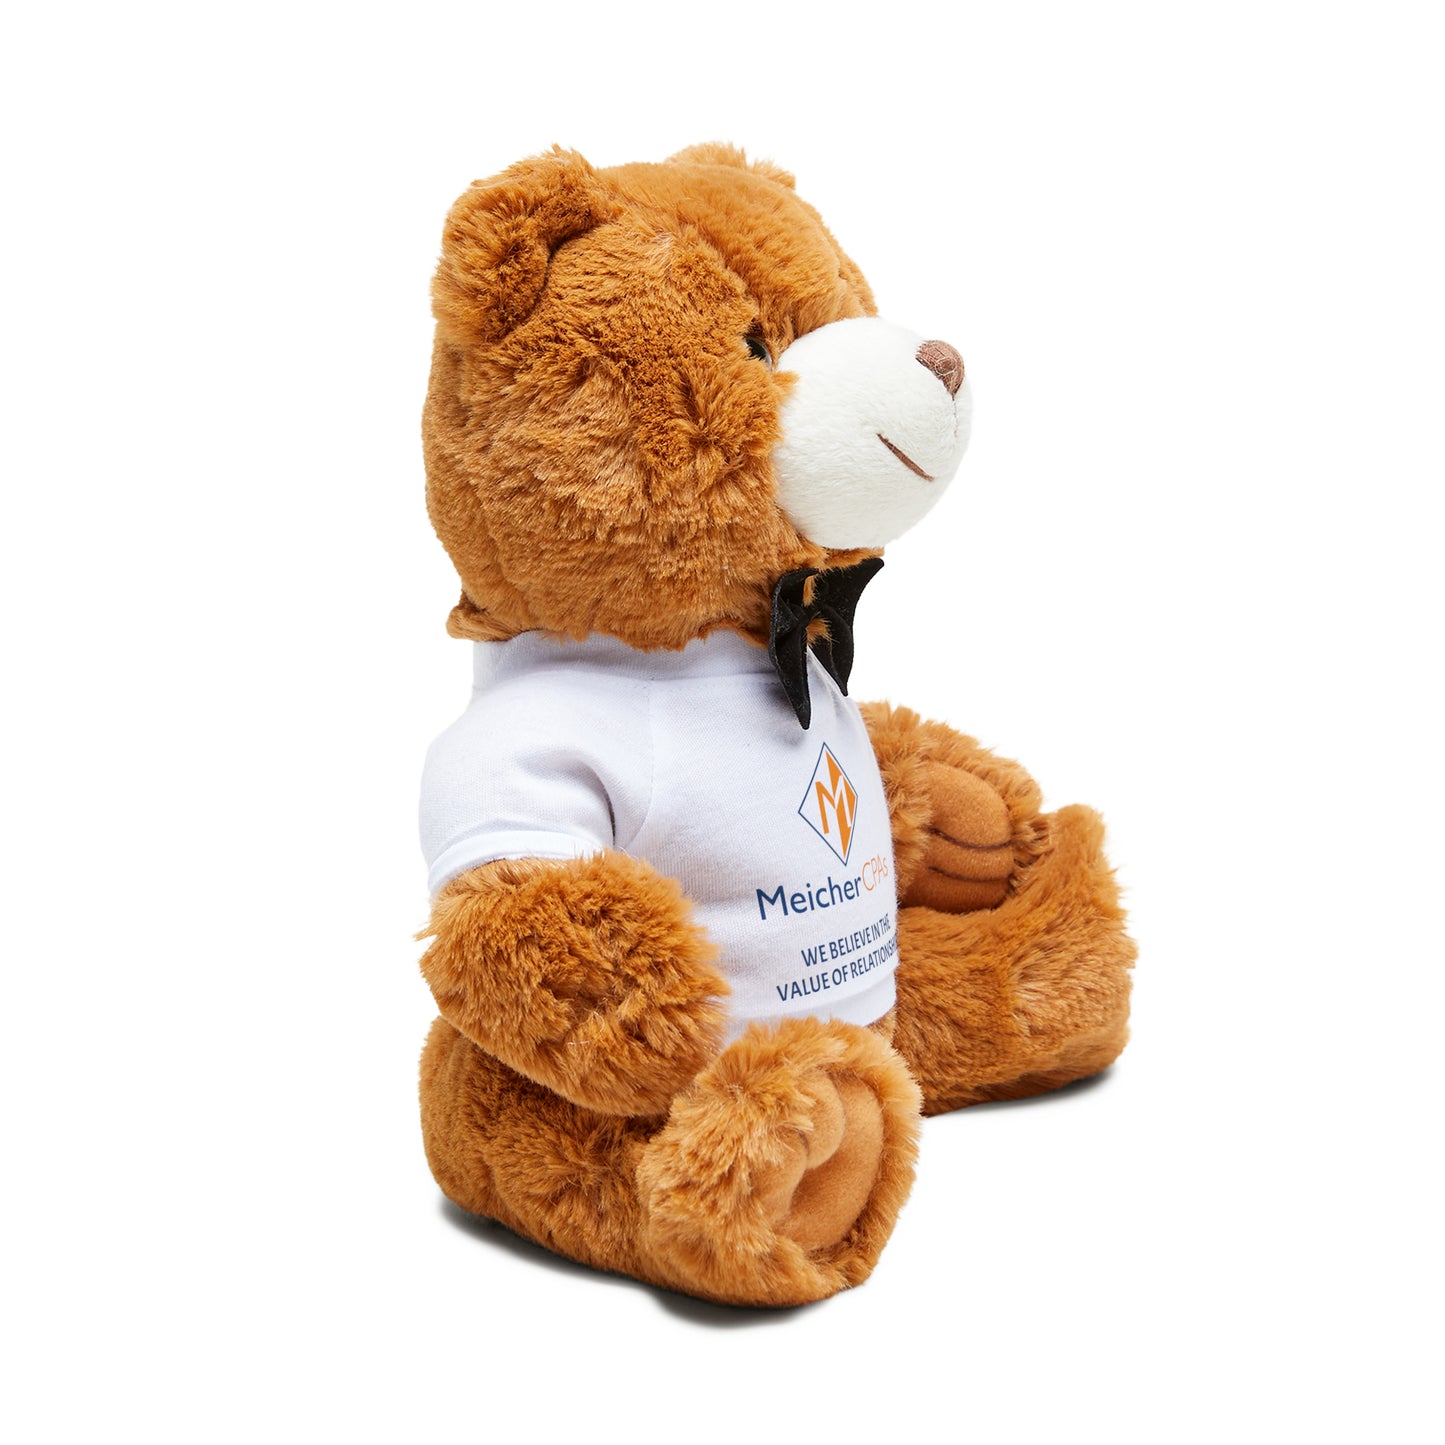 Meicher - Teddy Bear with T-Shirt